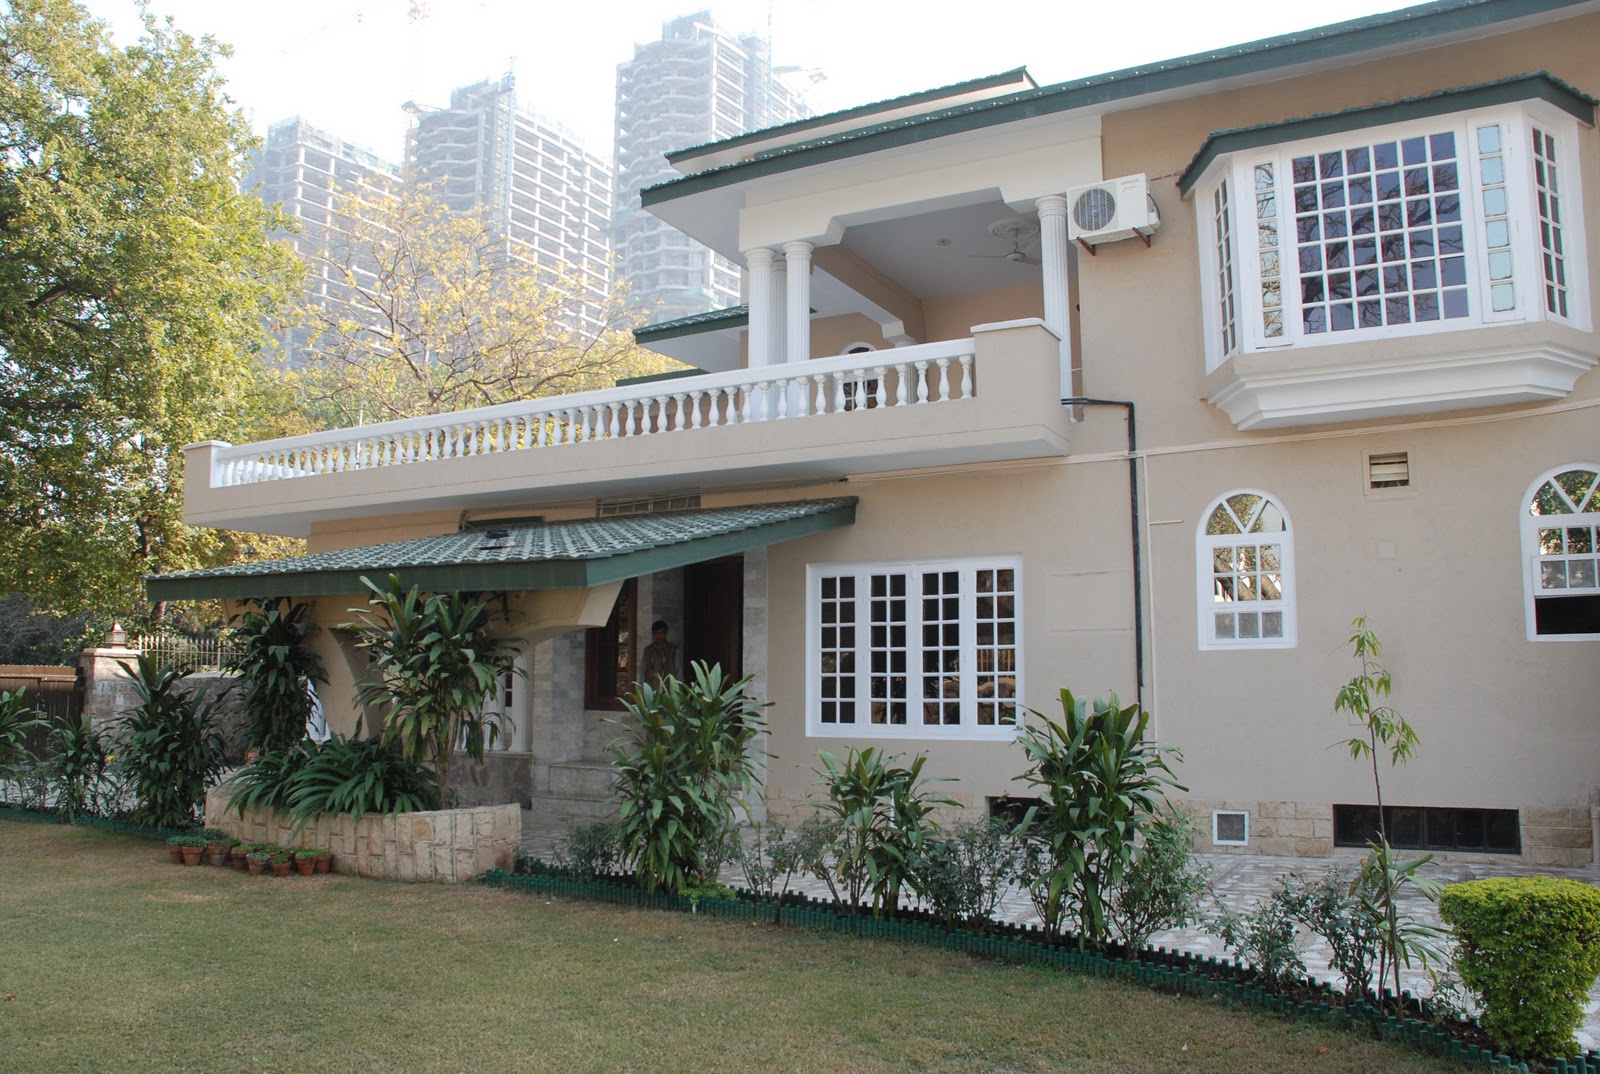 Guest house in Islamabad: Guest houses in Islamabad